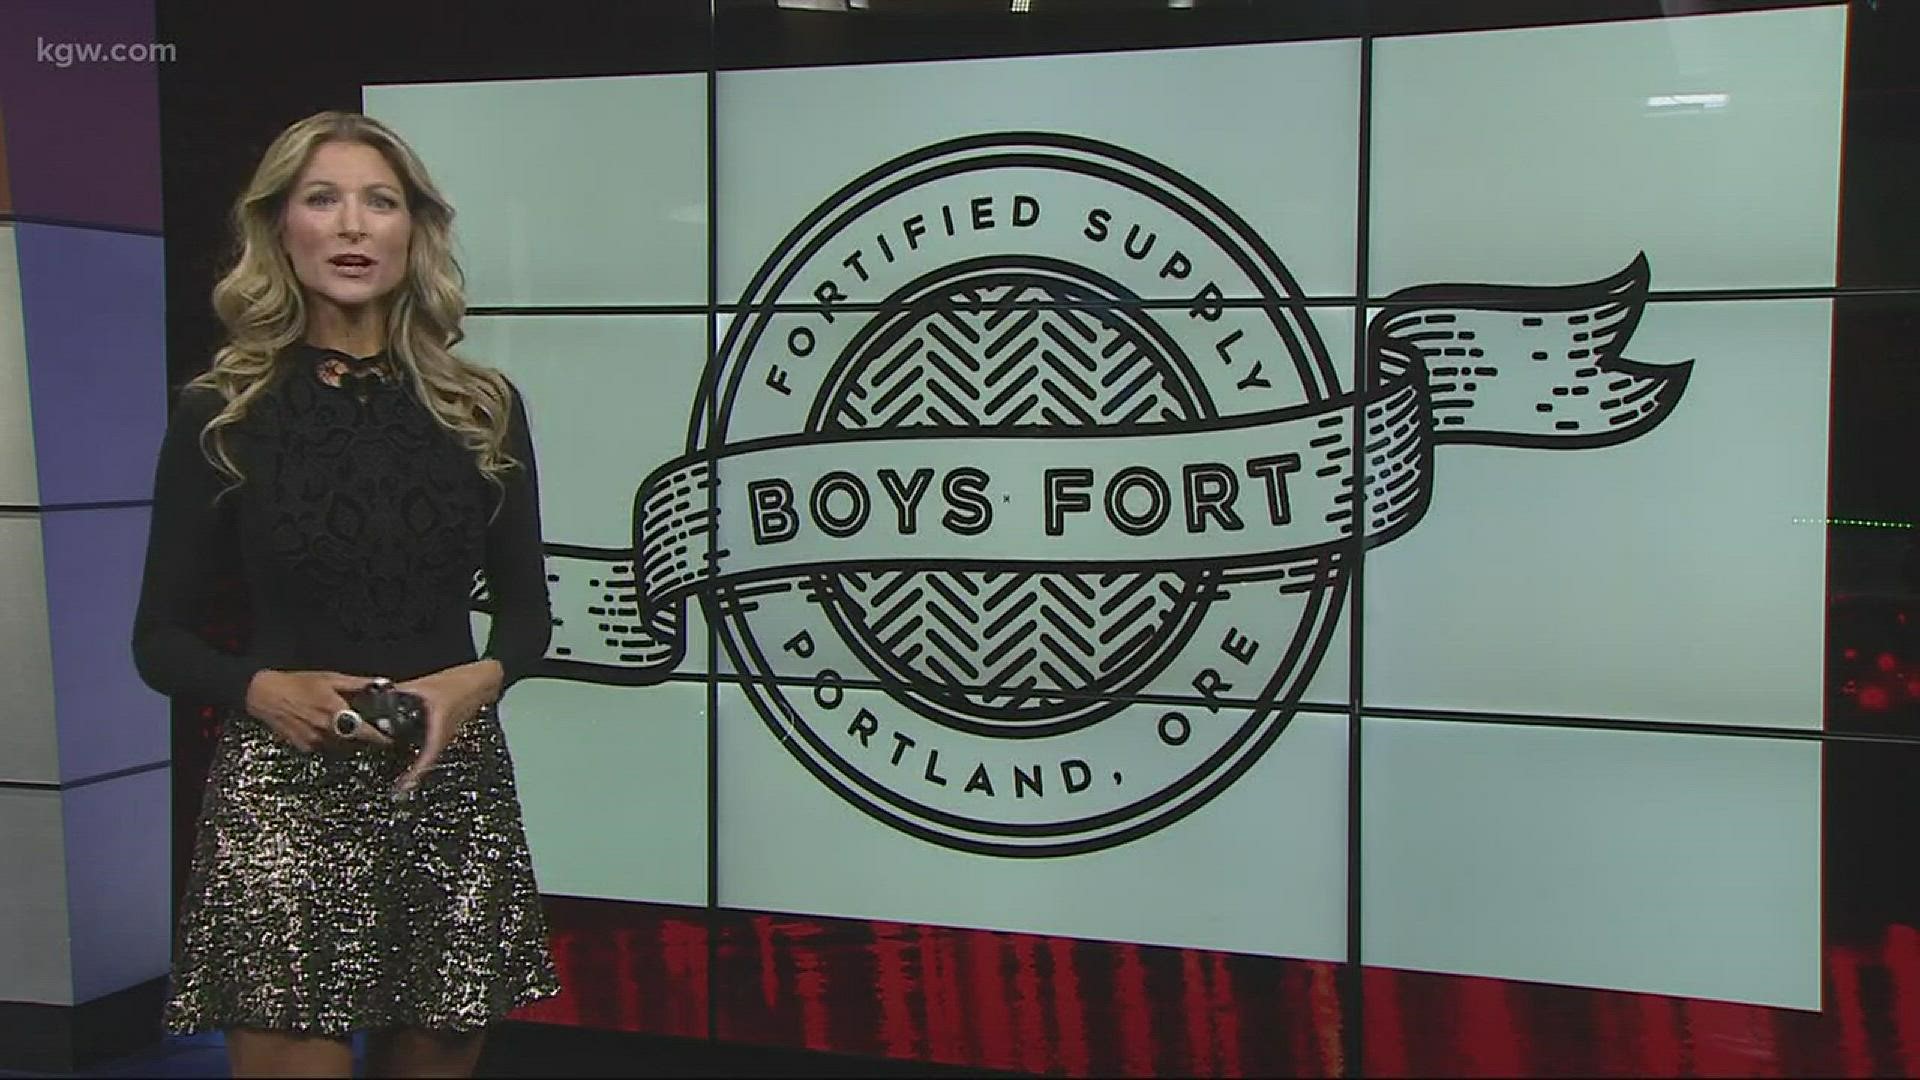 Boys Fort reopens in new location